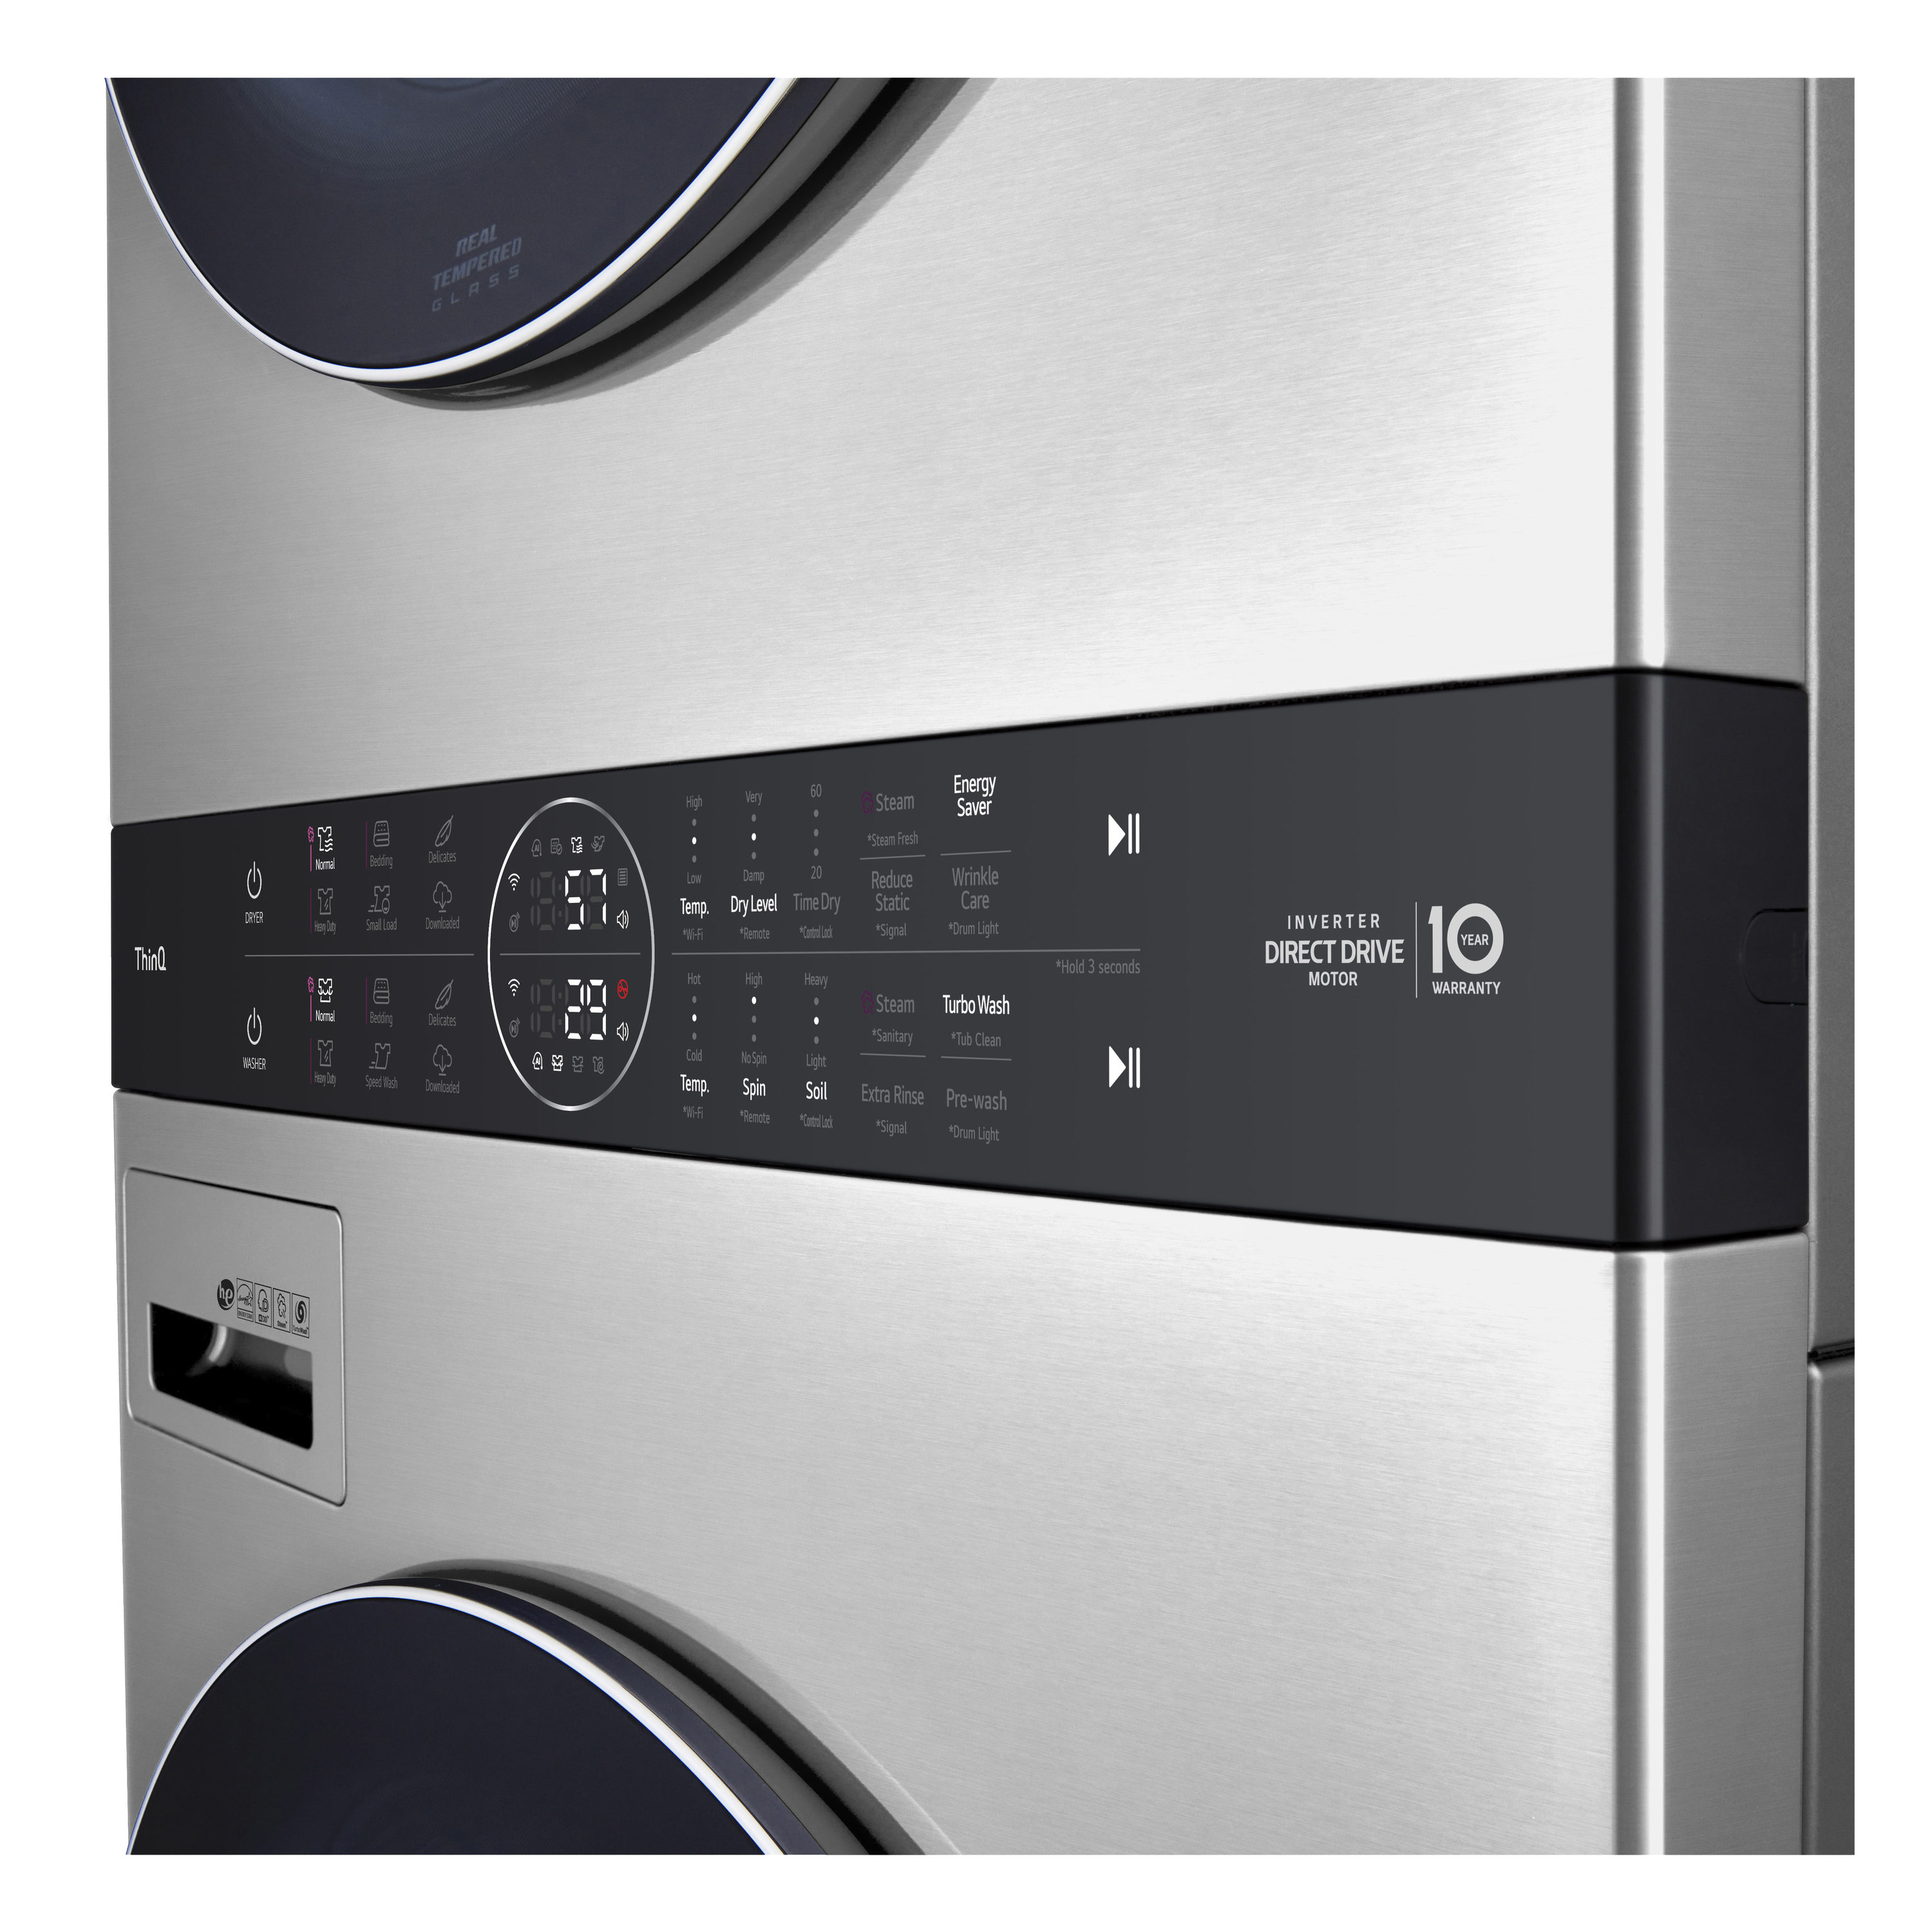 LG STUDIO Wash Washer in Gas ft the Laundry Stacked Stacked (ENERGY ft 5-cu Tower Center Centers 7.4-cu Dryer STAR) Laundry department at and with